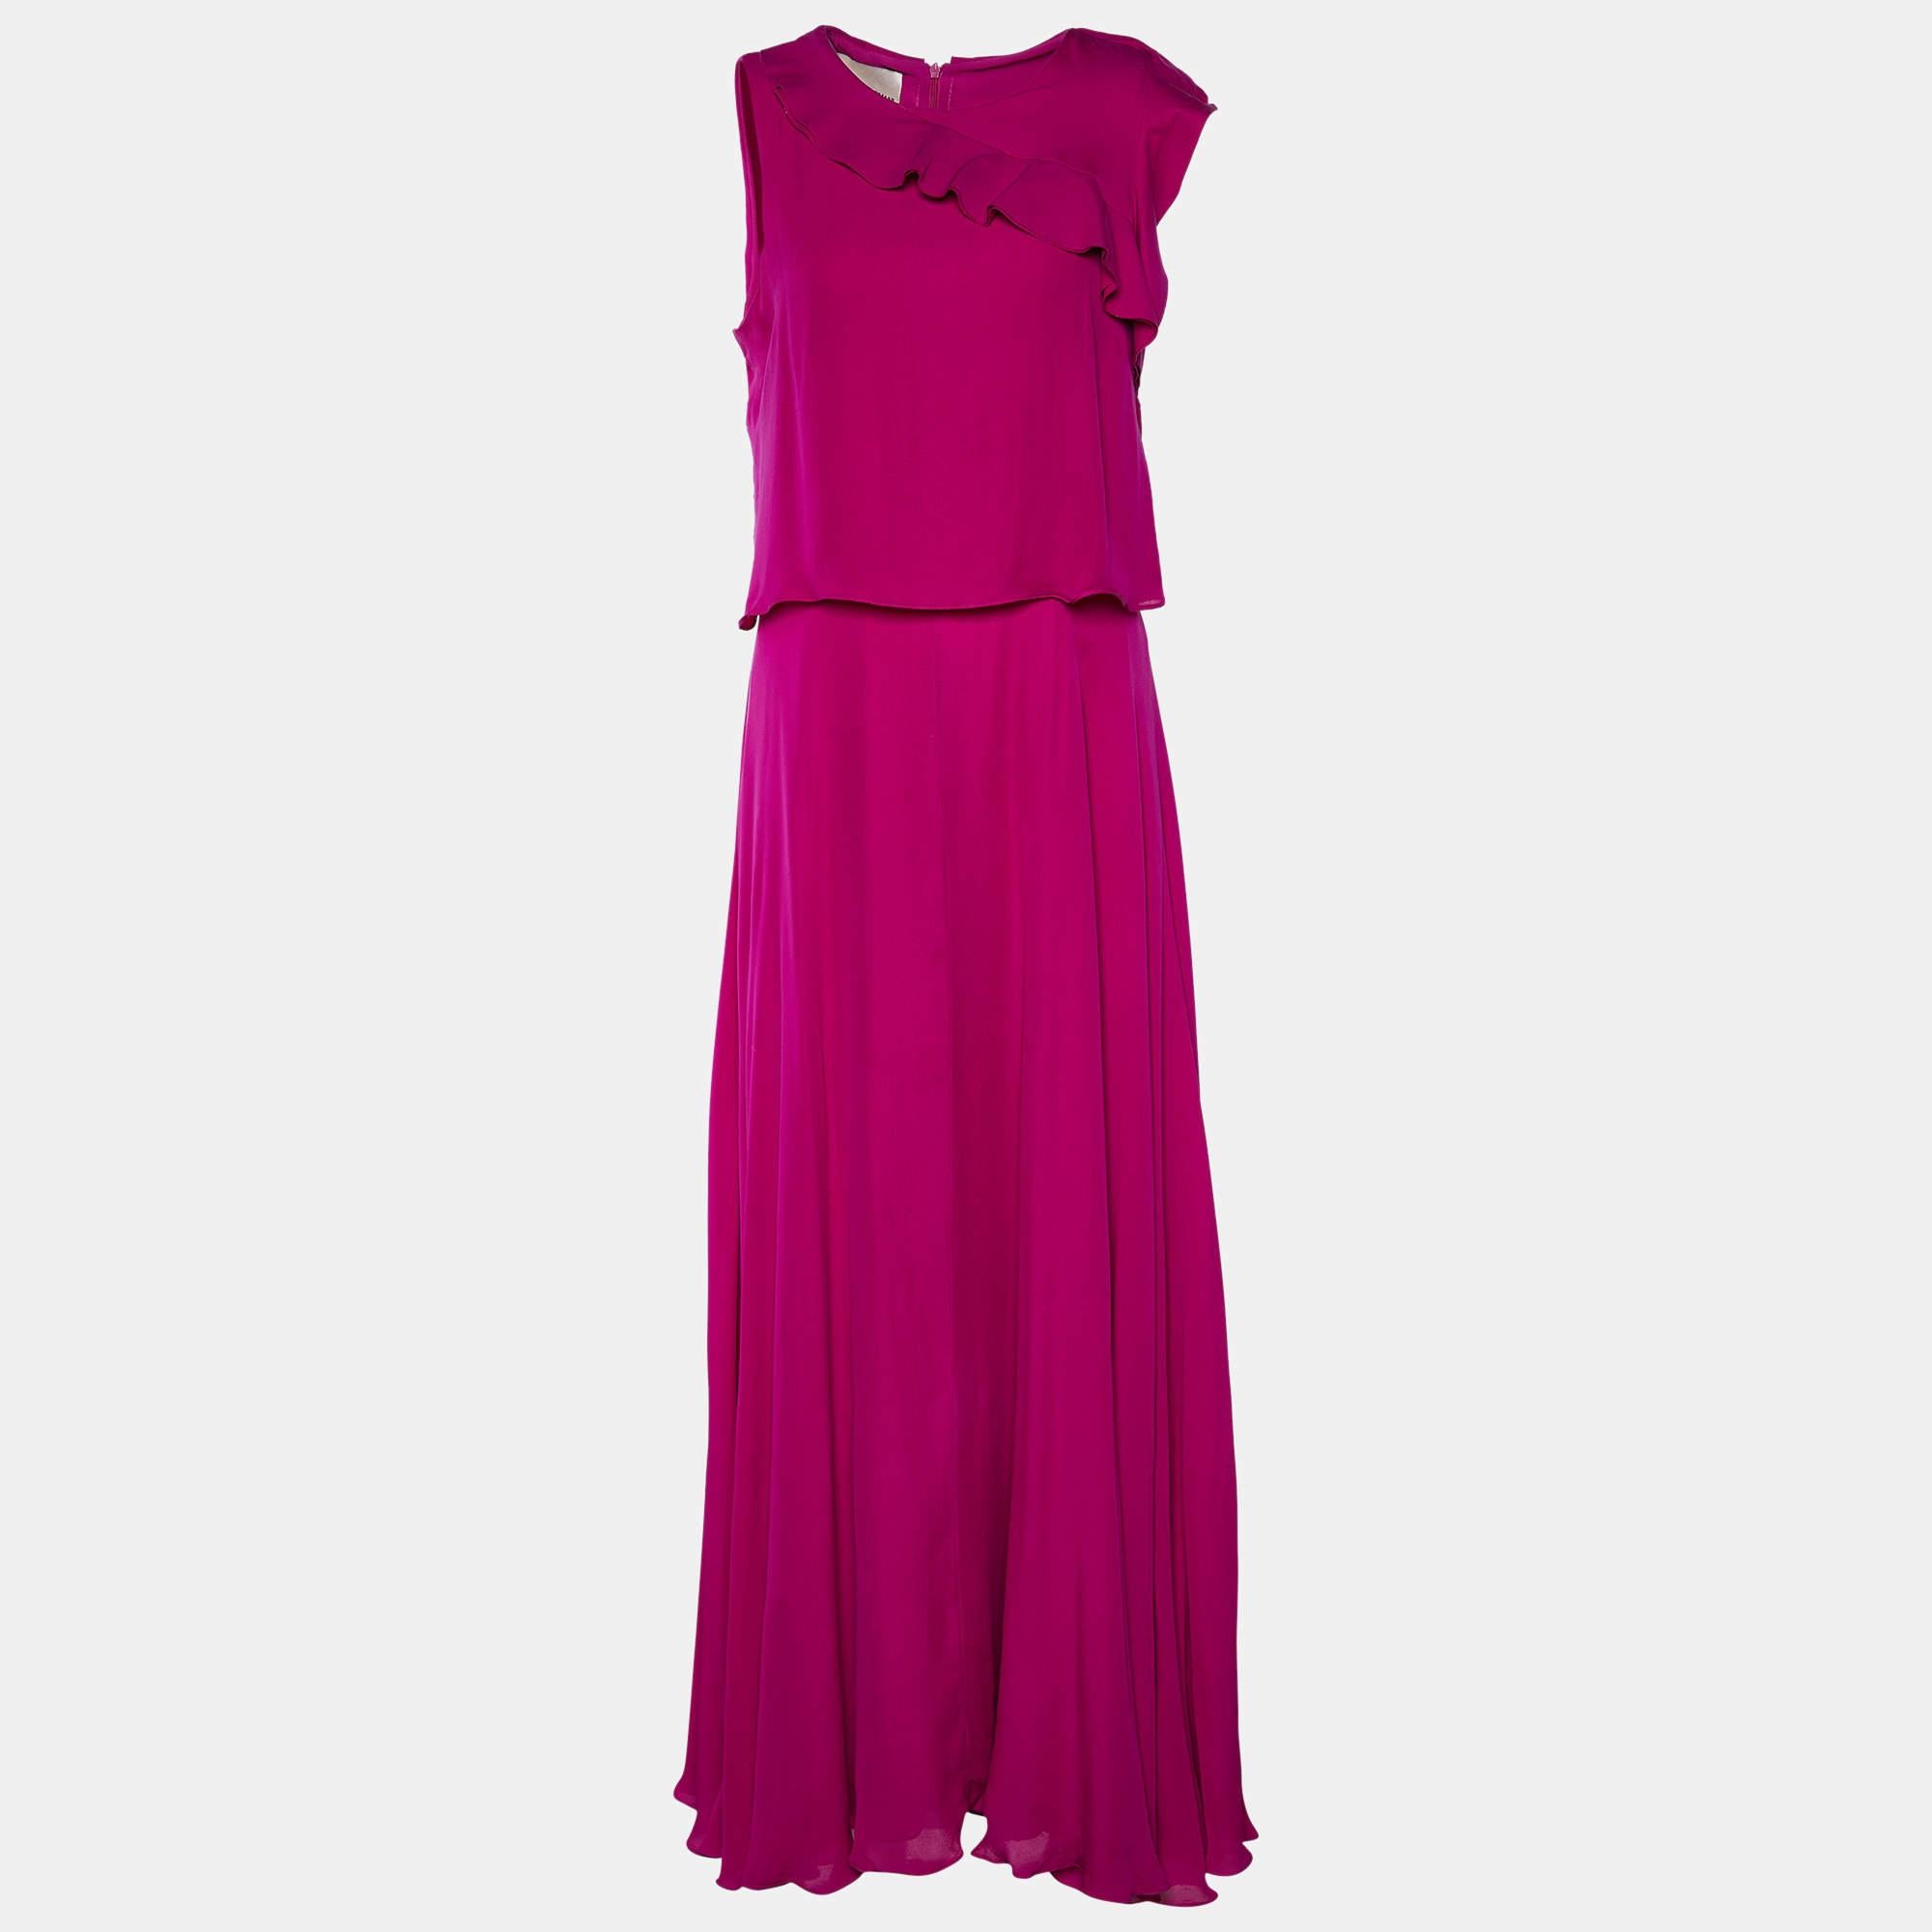 Flaunt a stylish look by wearing this beautiful dress. Tailored using fine fabric, this dress is worth the buy.

